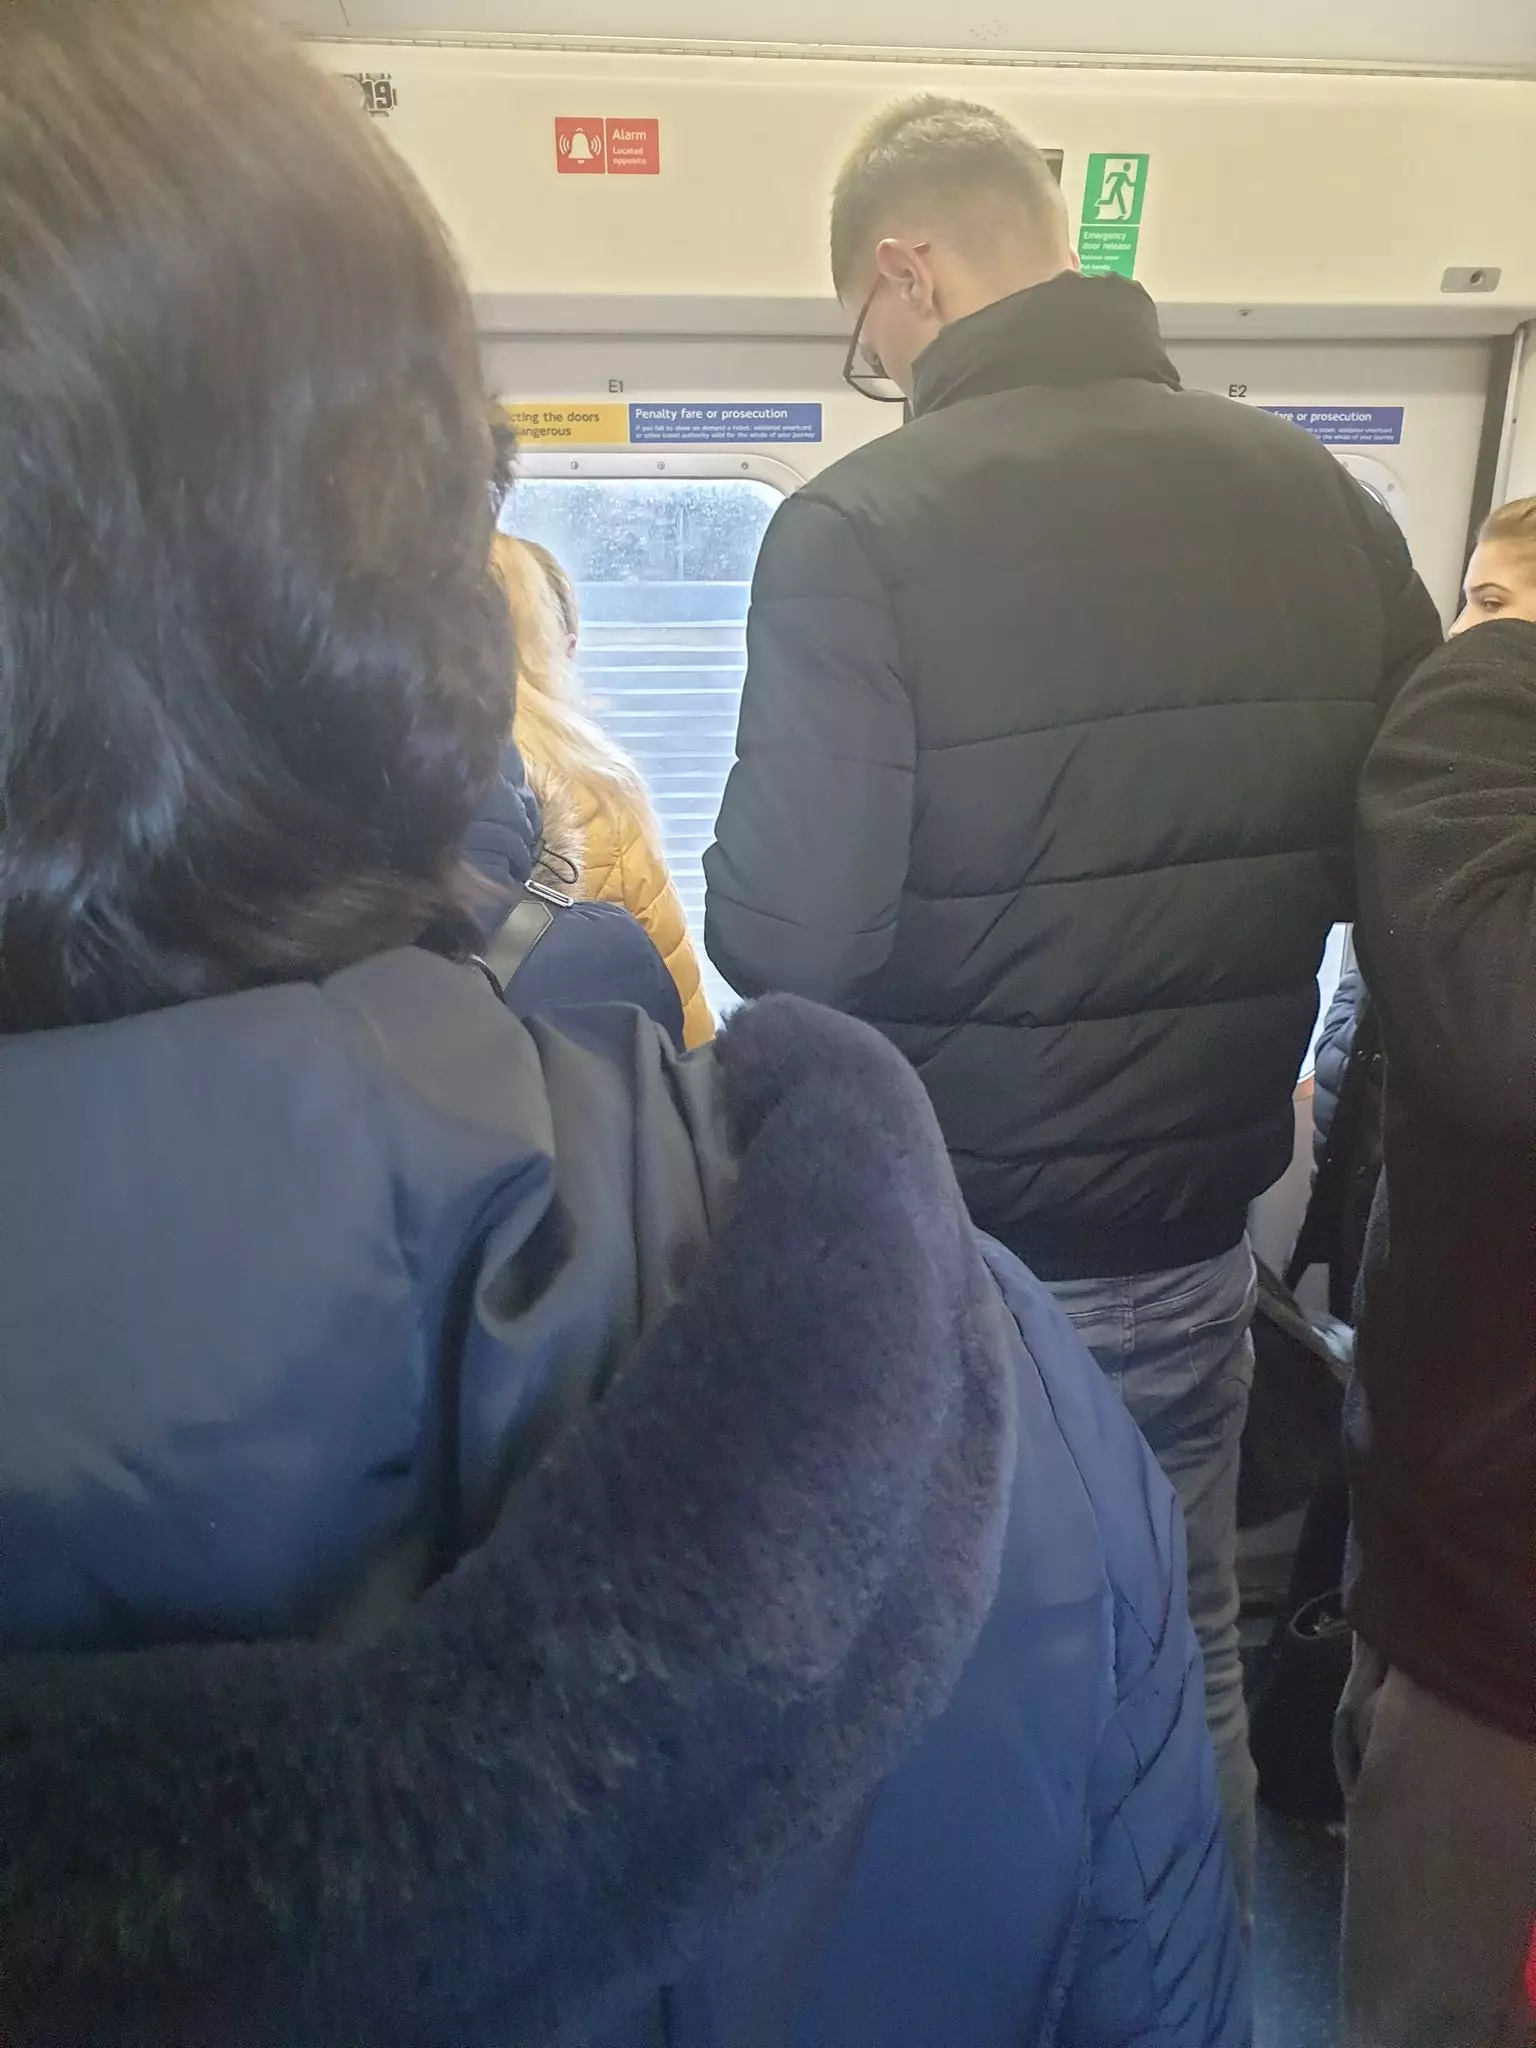 One NHS worker said it was impossible to keep two metres away from other commuters.